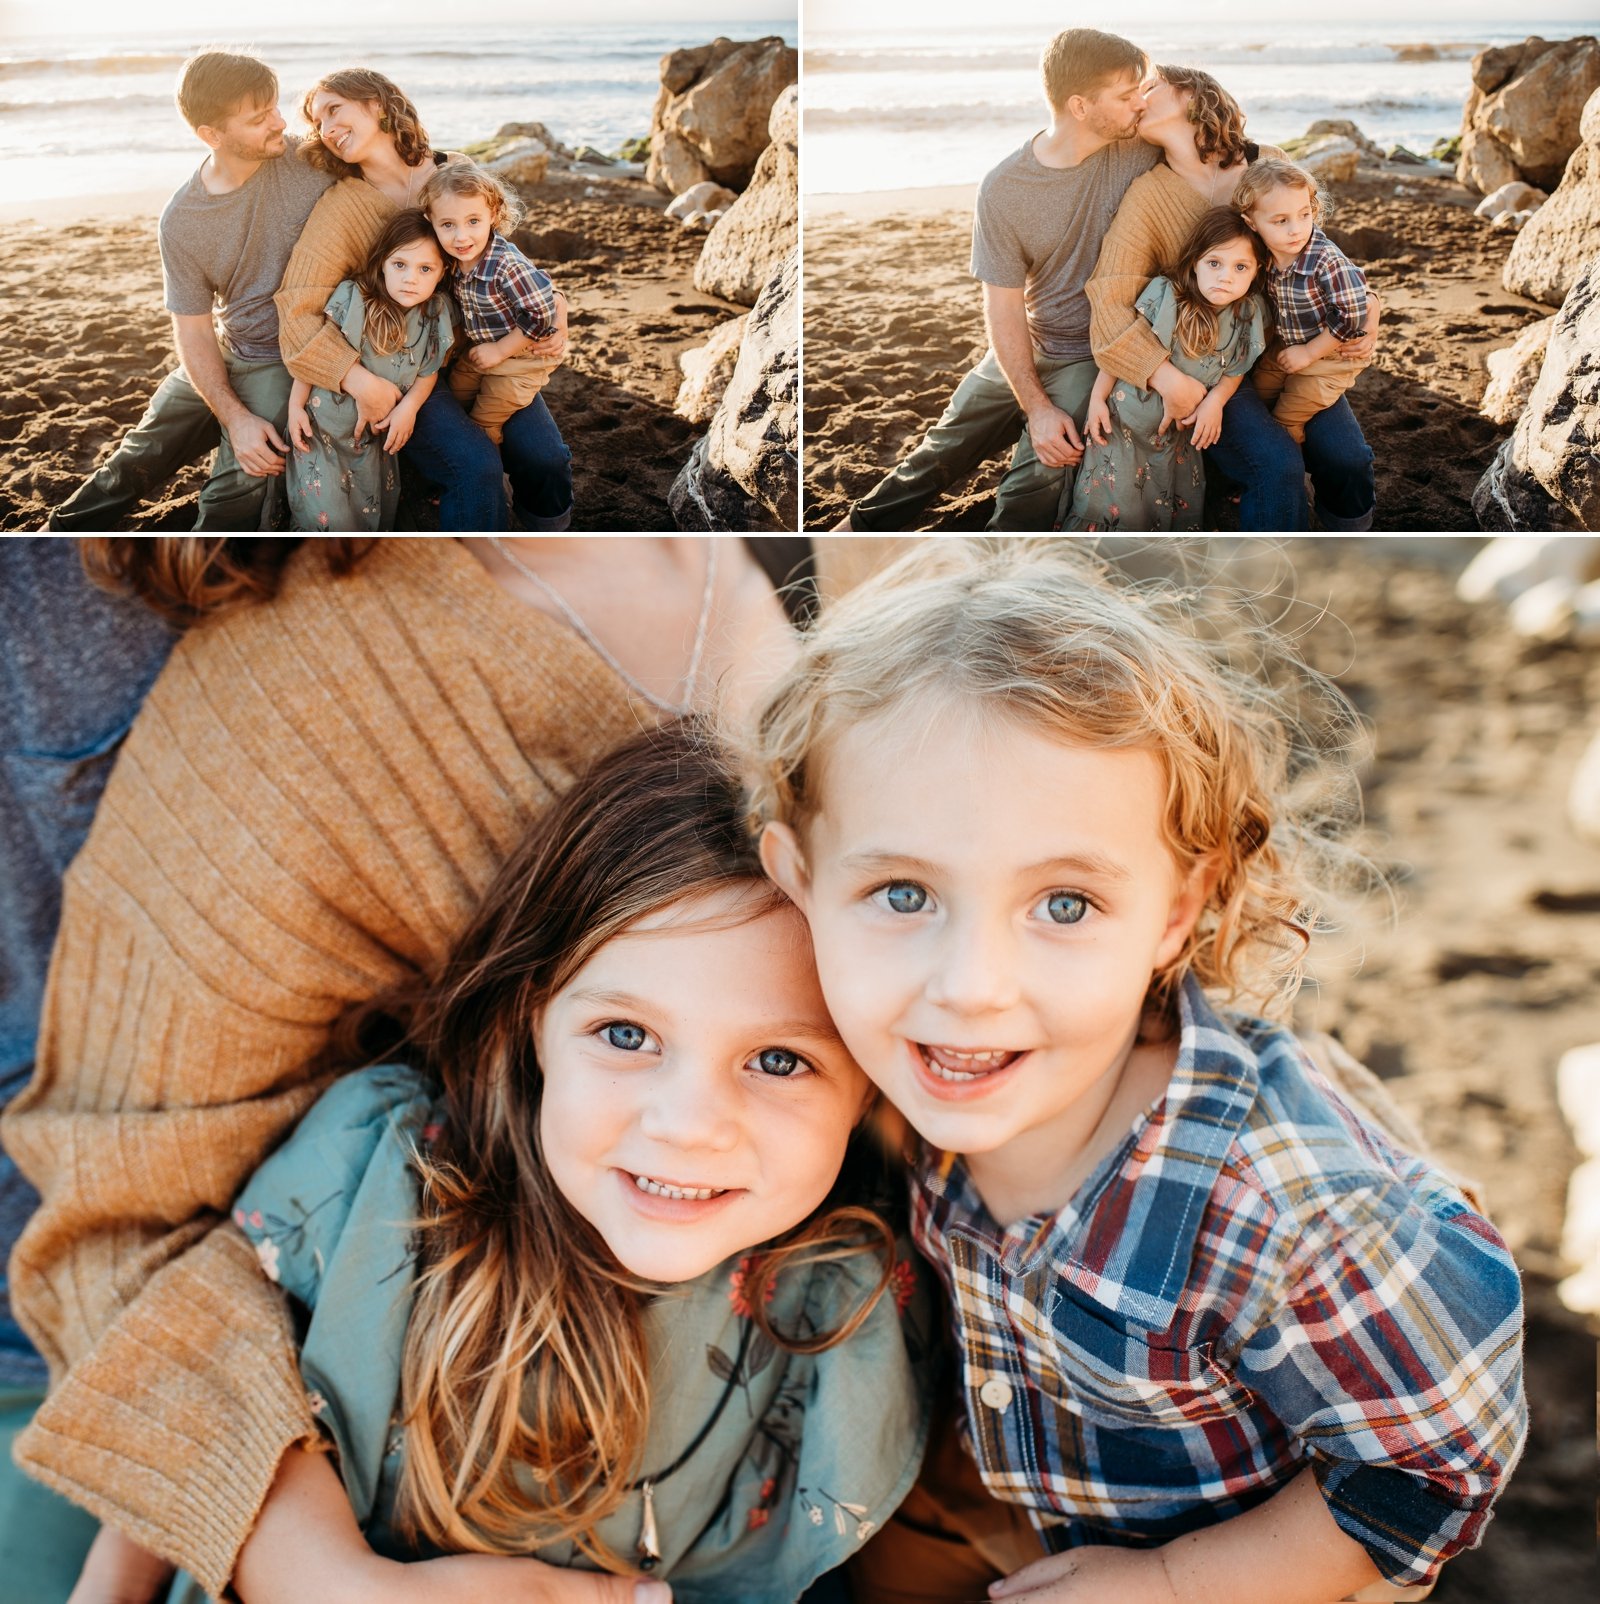 bay area beach photoshoot sunset family lifestyle photographer young soul photography  32.jpg